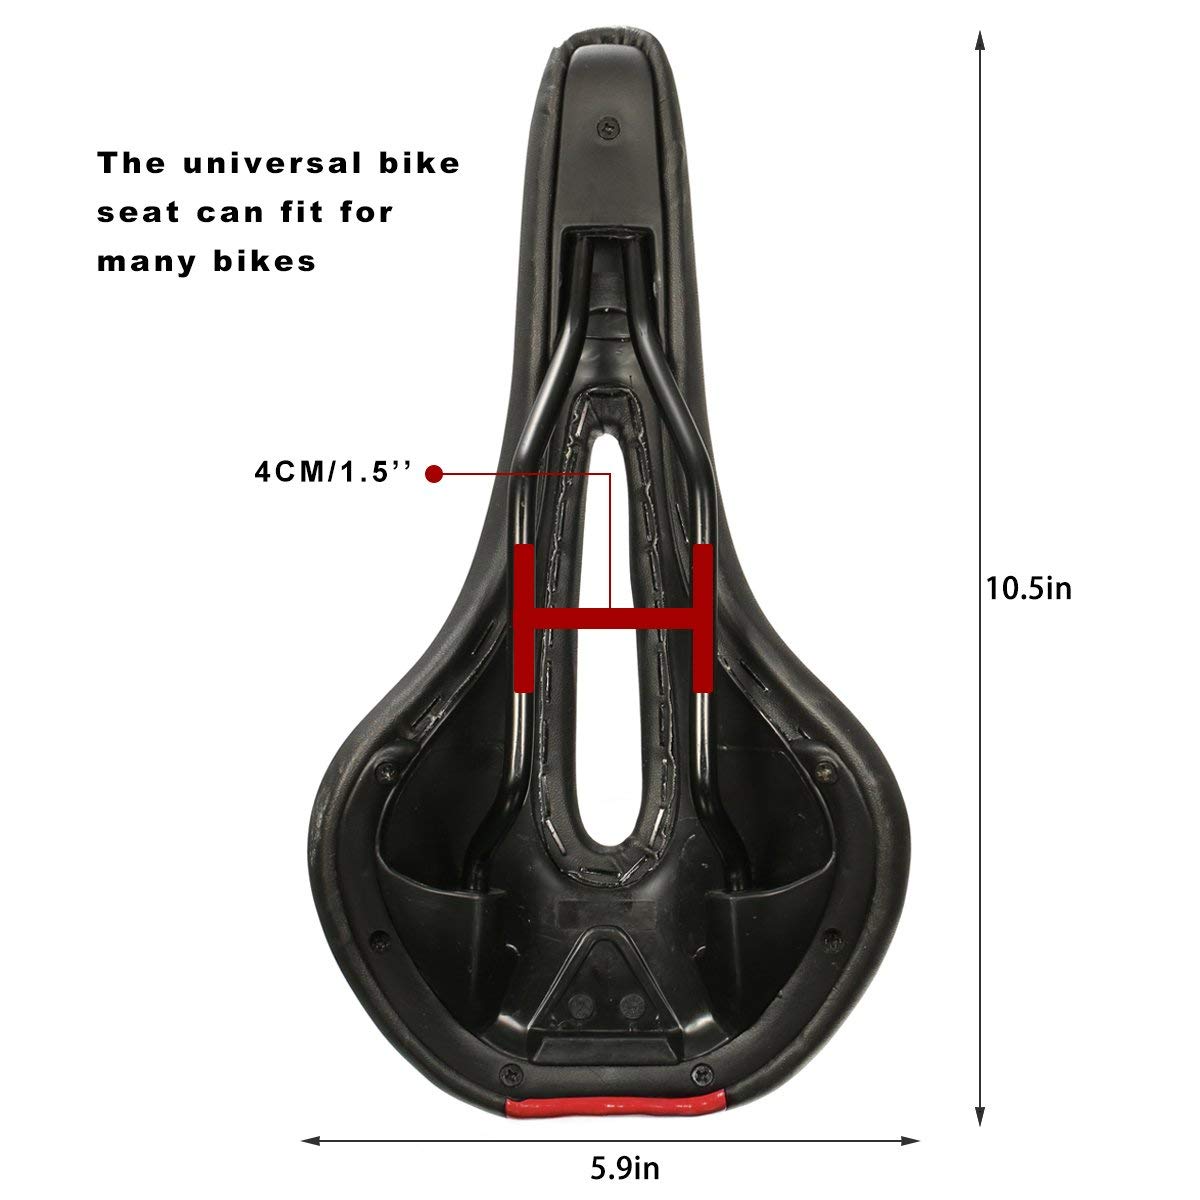 EZGO Bike Seat Mountain Bicycle Seat Saddle Breathable Soft Padded with Hollow Central Relief Zone Black - image 3 of 5